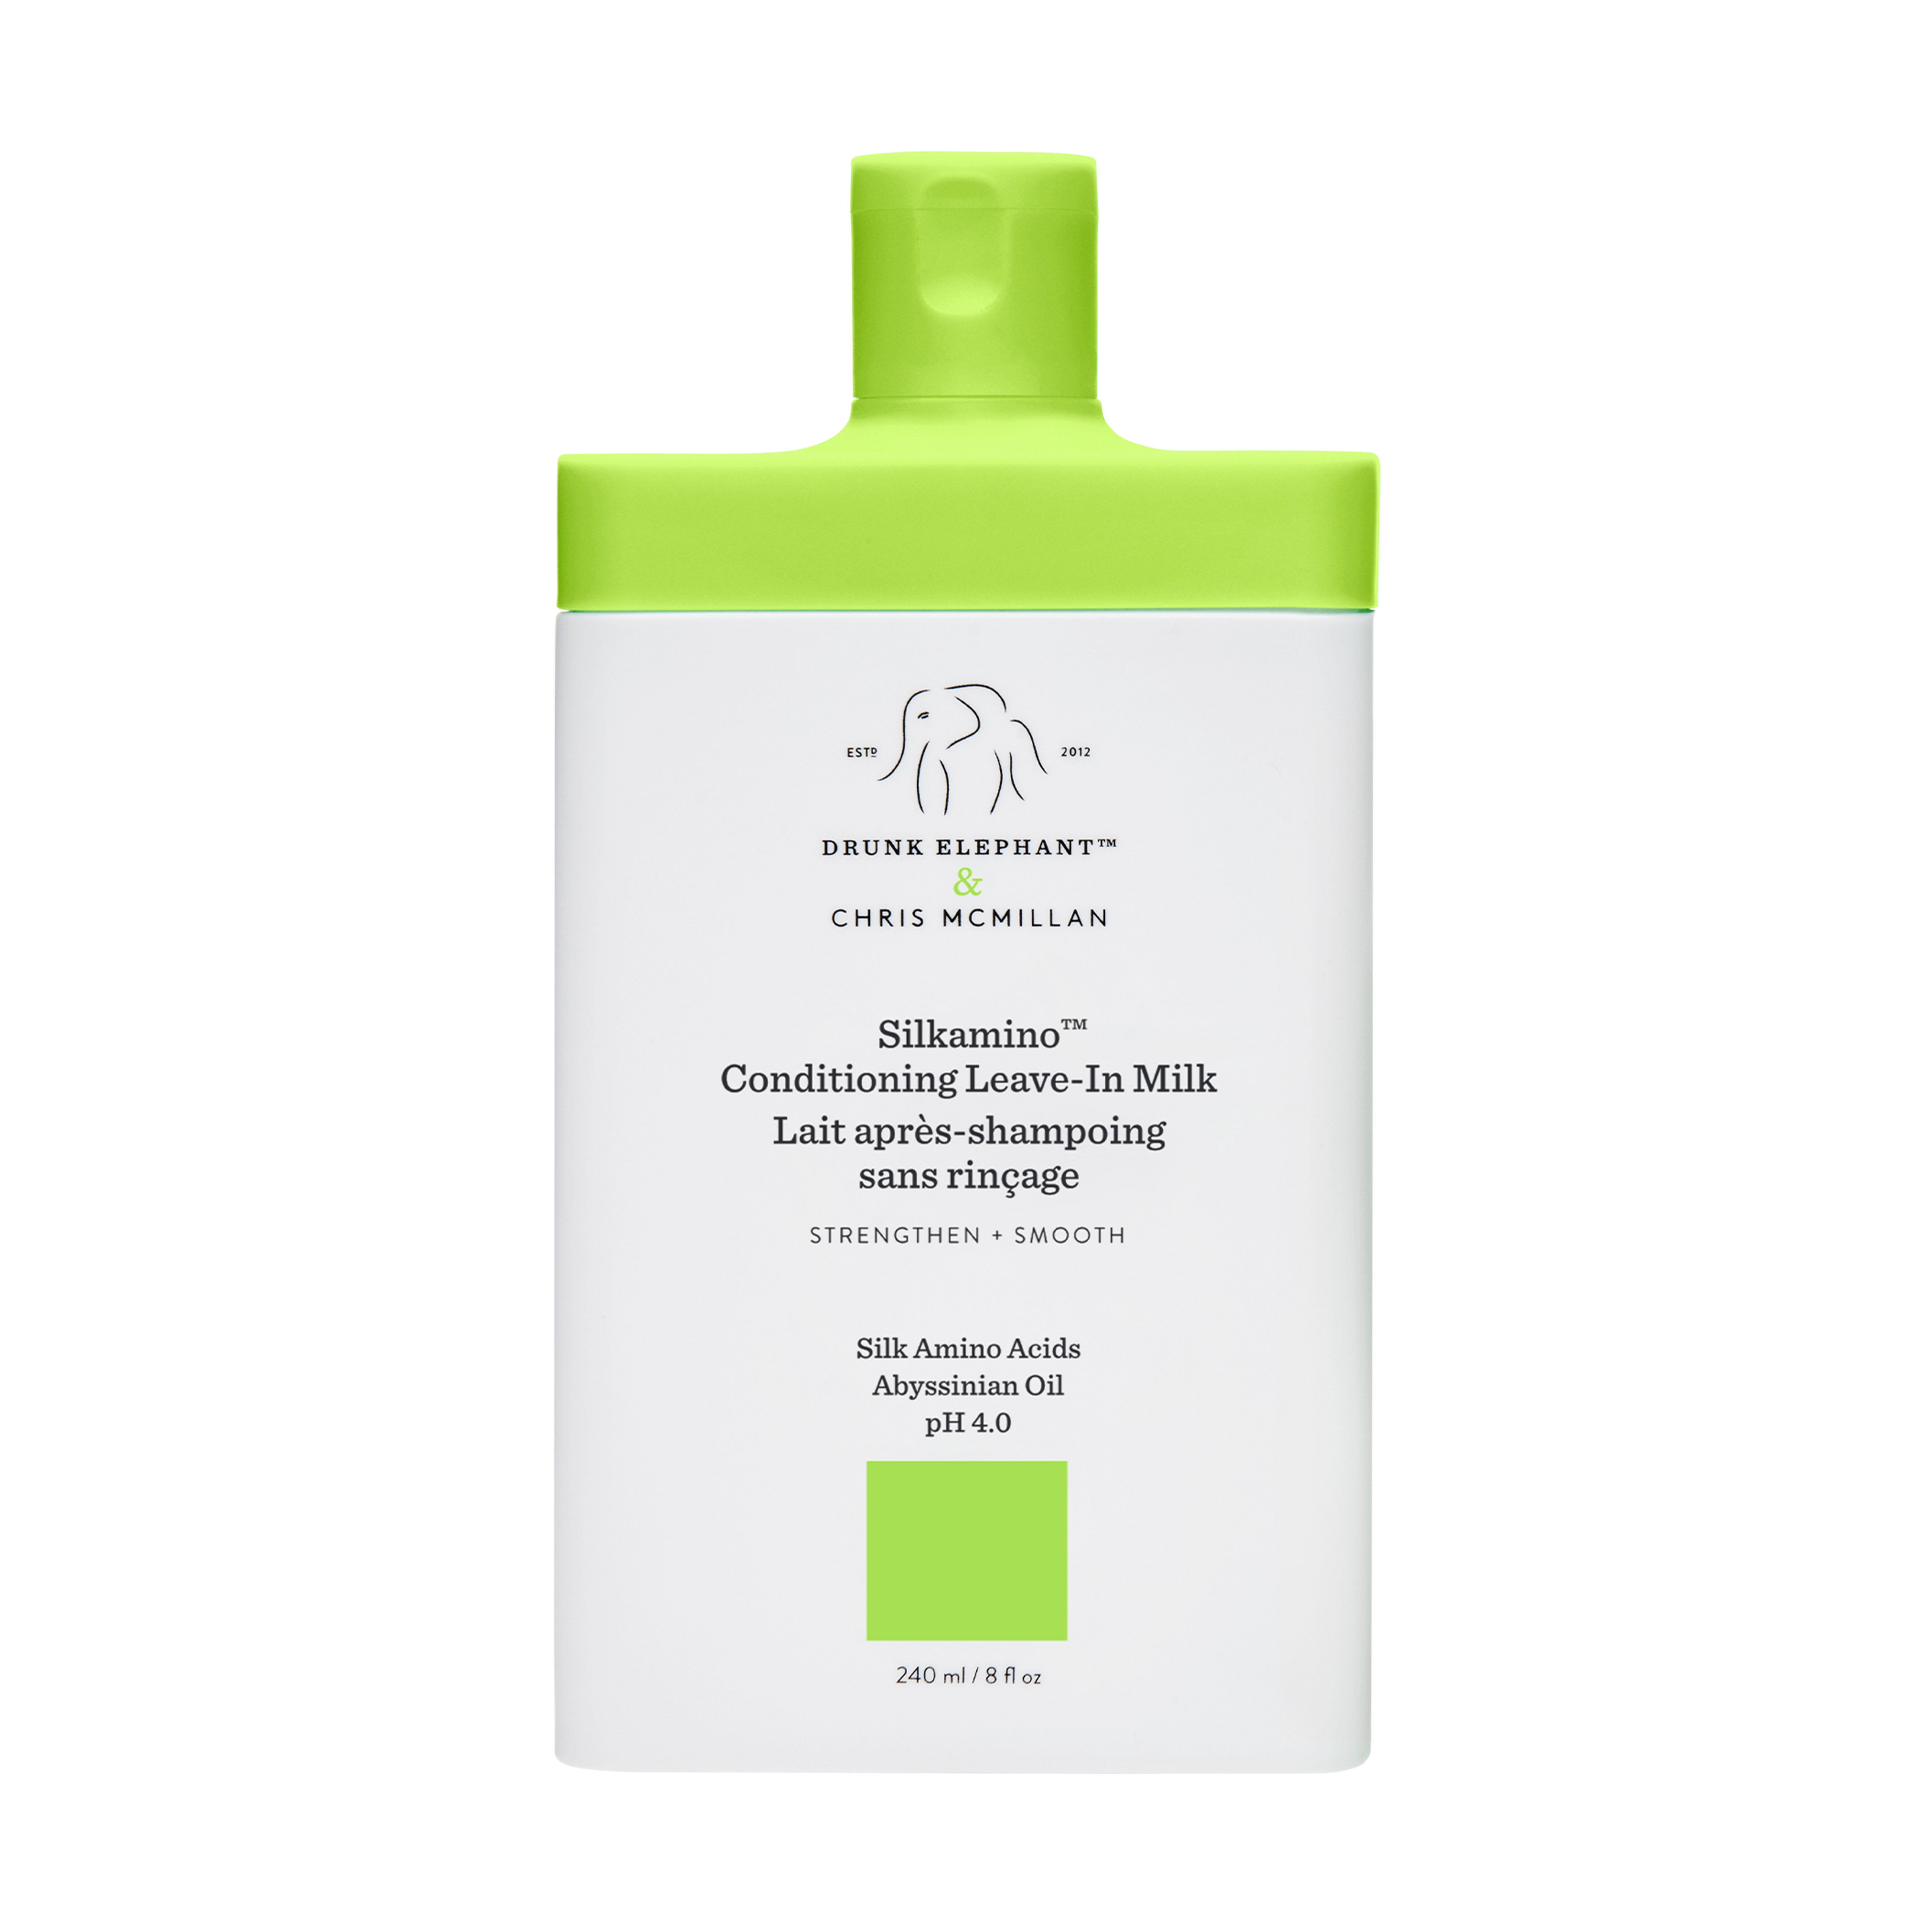 Drunk Elephant Silkamino™ Conditioning Leave-In Milk | Space NK